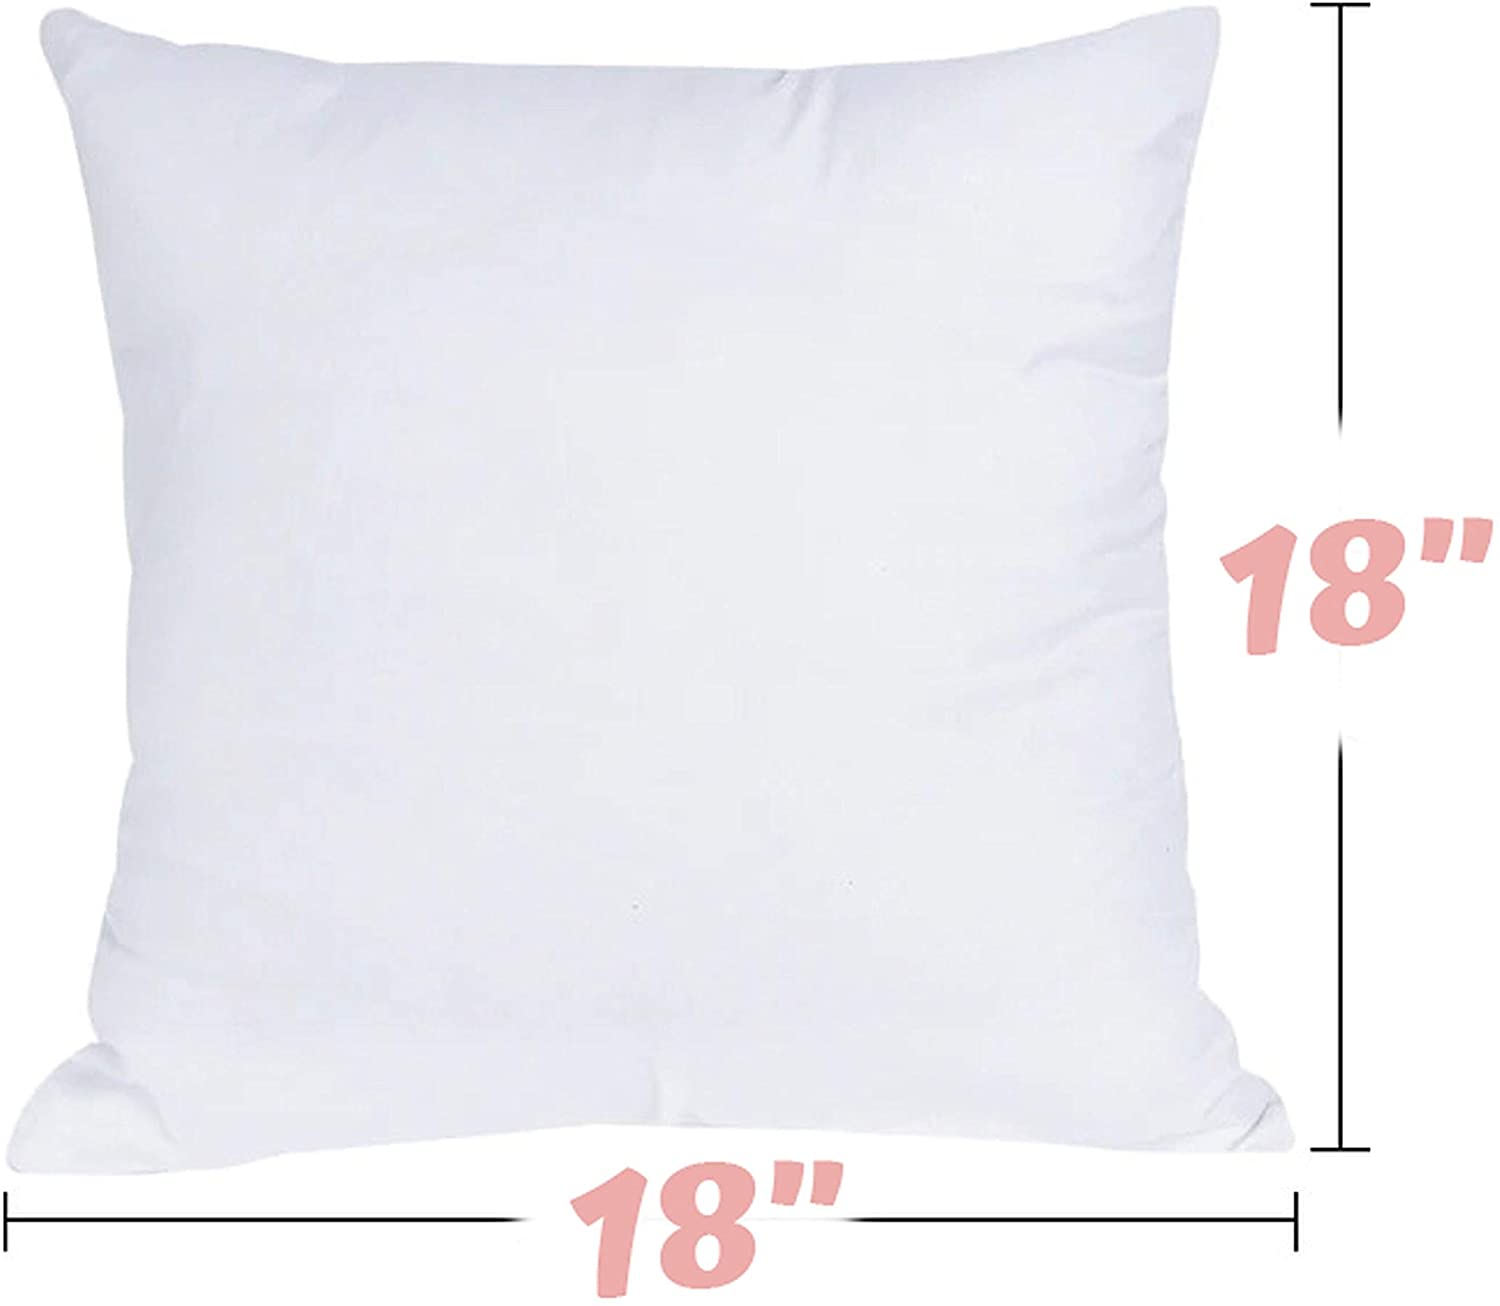 Pillowcases Simple Fashion Throw Pillow Case 20997400 278 Color Graphic Casual Cotton Removable Cover